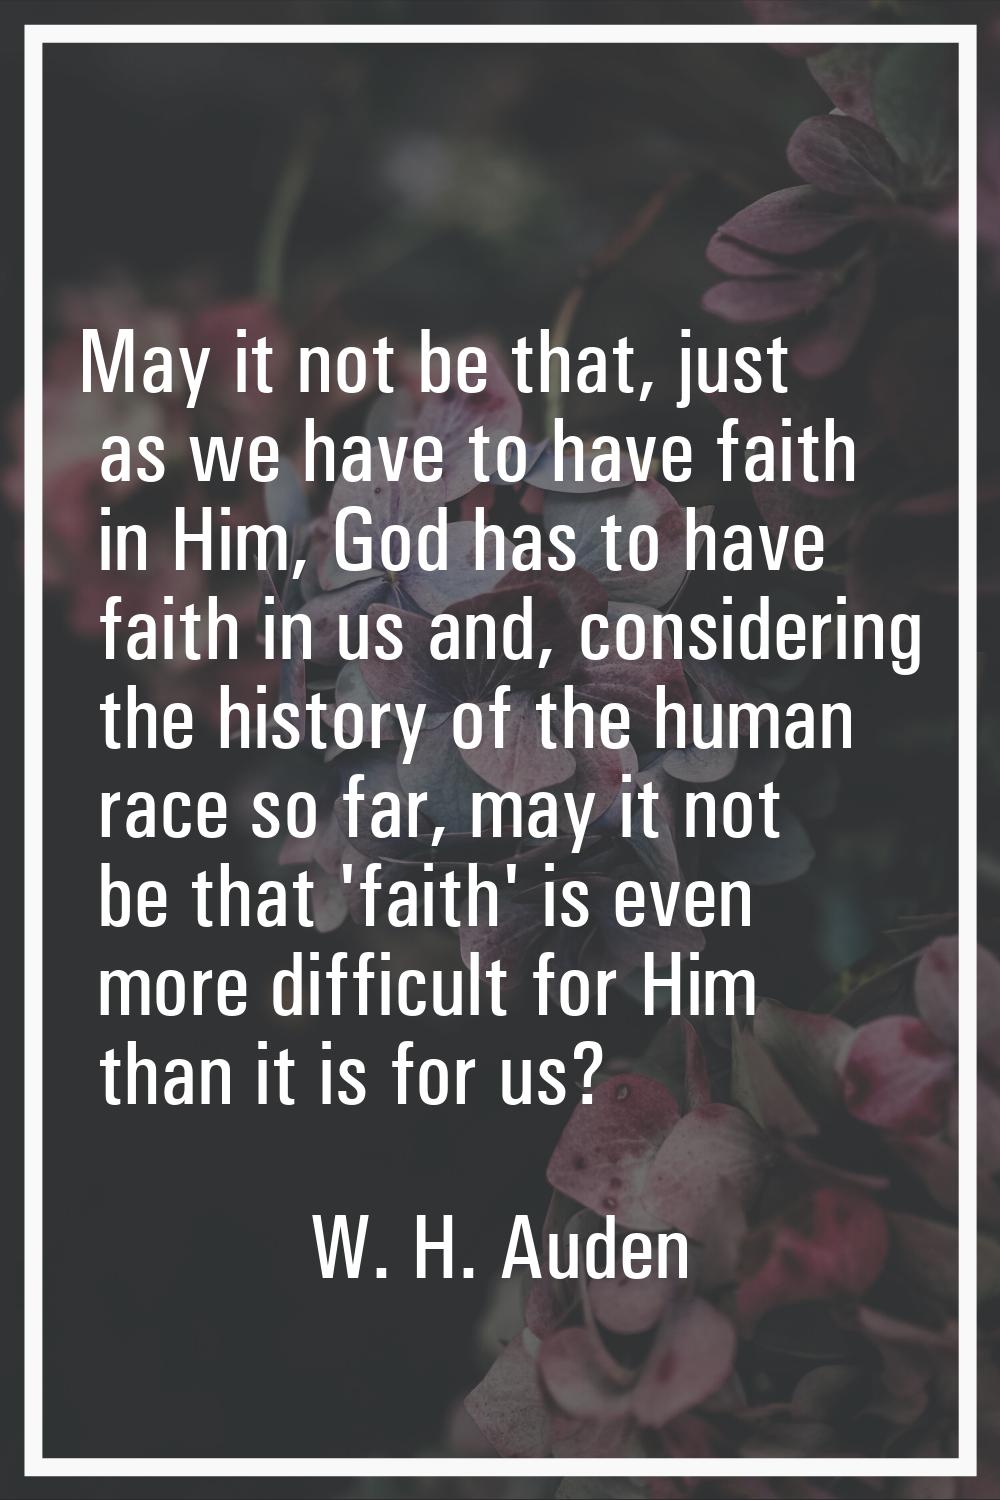 May it not be that, just as we have to have faith in Him, God has to have faith in us and, consider